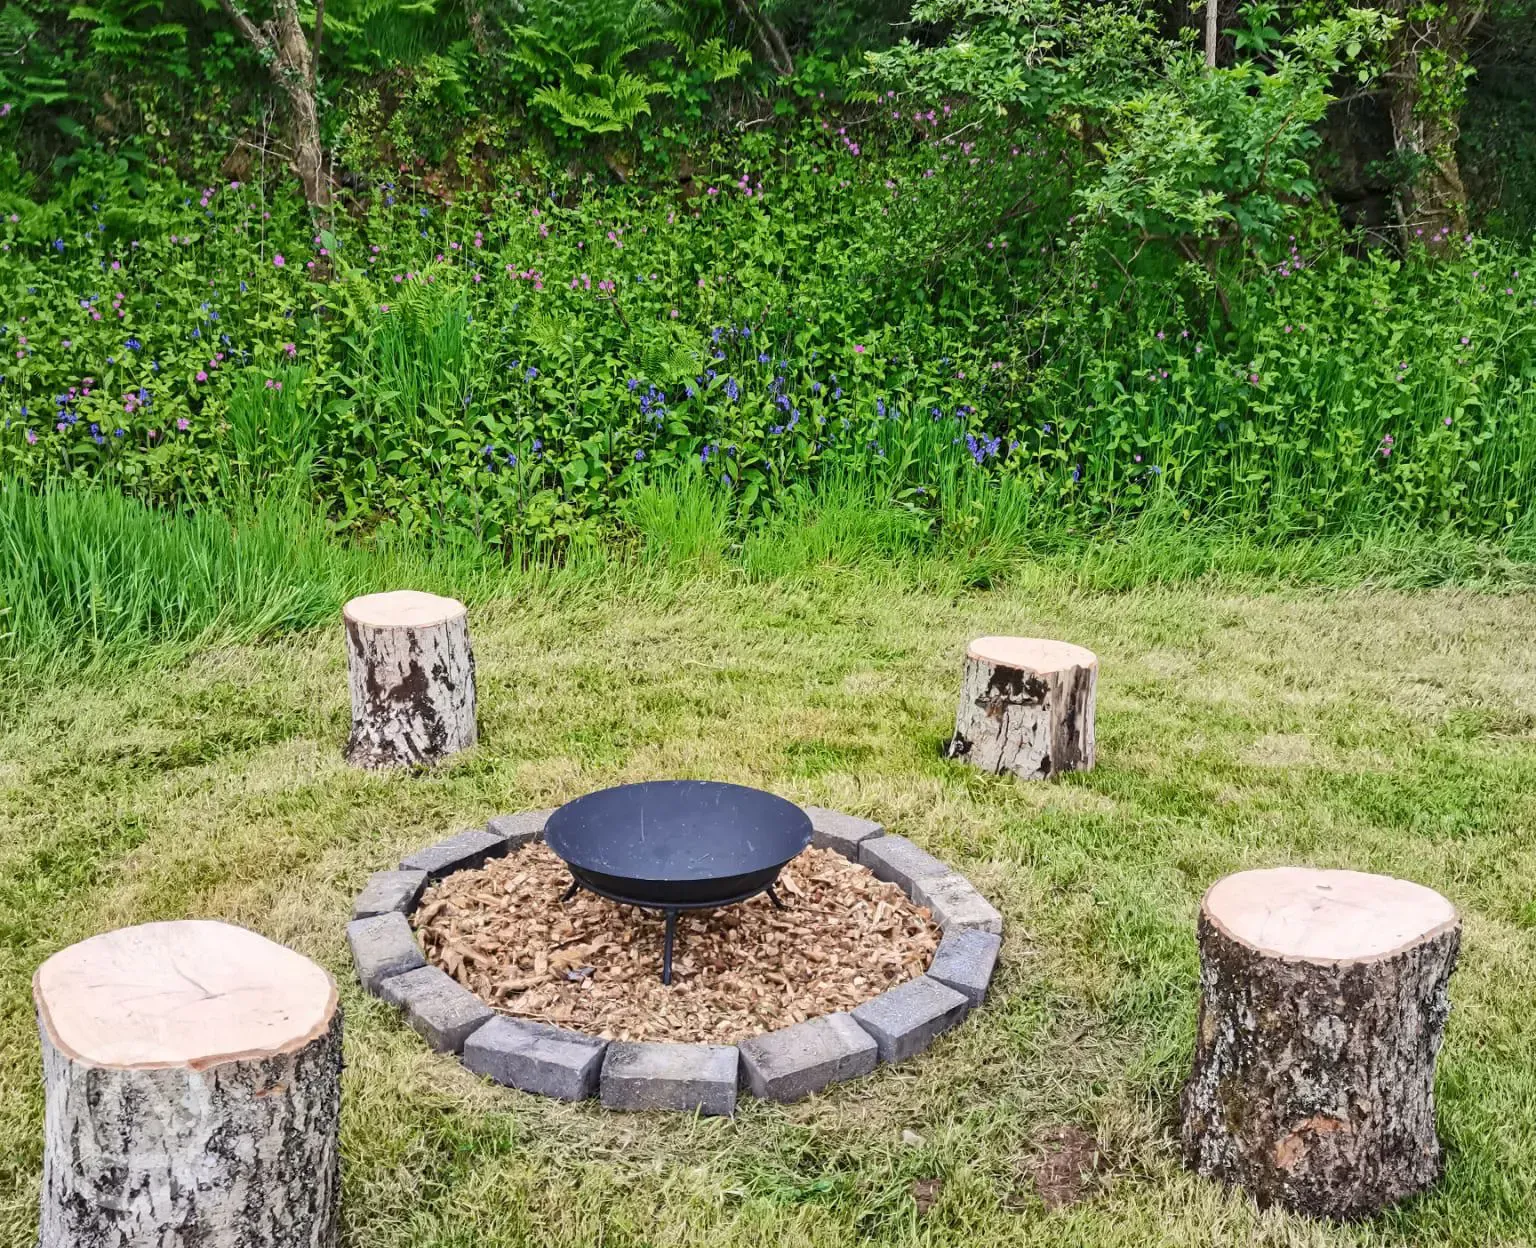 Campfire private for each individual pitch